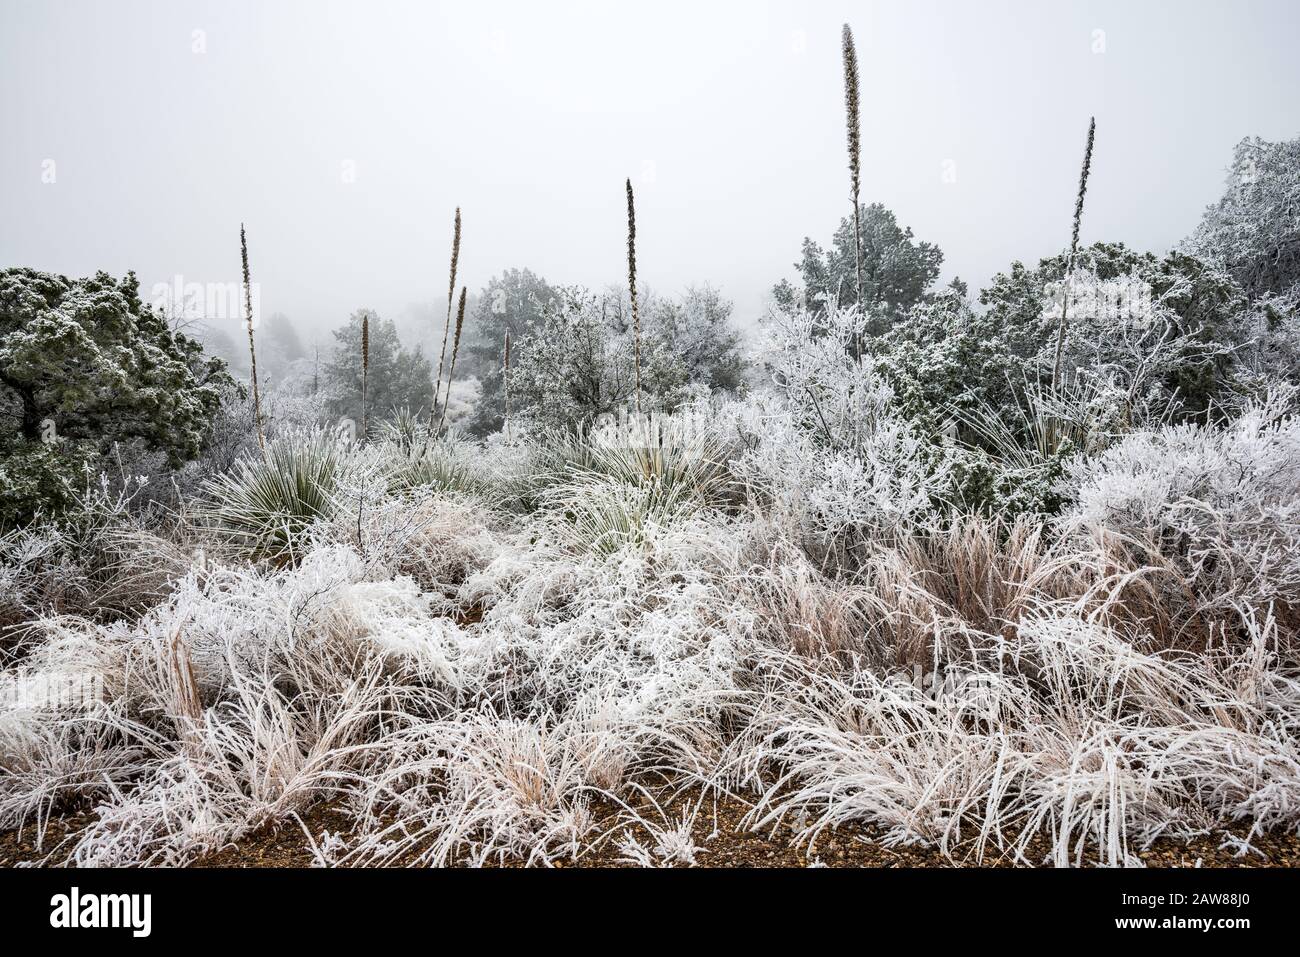 Sotol plants and grass covered with frozen fog aka atmospheric icing in winter, Chihuahuan Desert, Big Bend National Park, Texas, USA Stock Photo